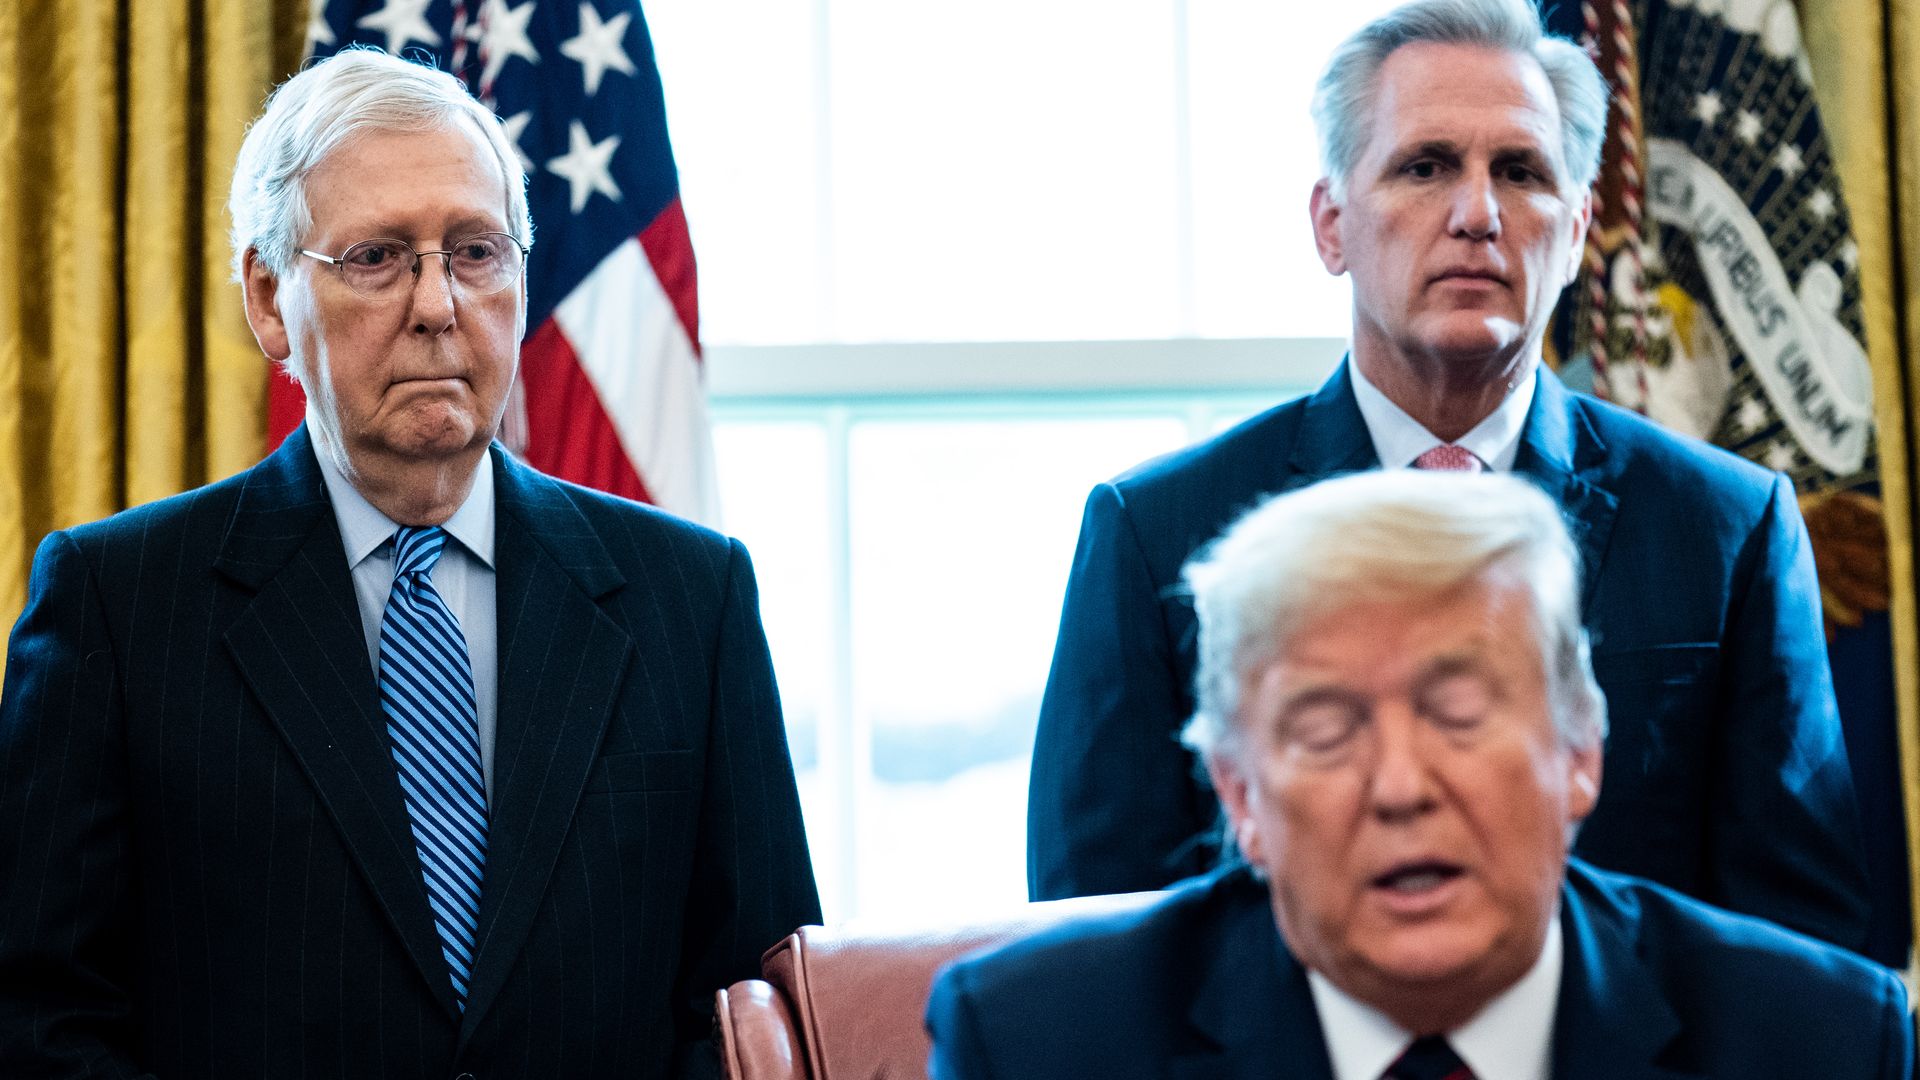 Mitch McConnell and Kevin McCarthy are seen standing behind President Trump in the White House.